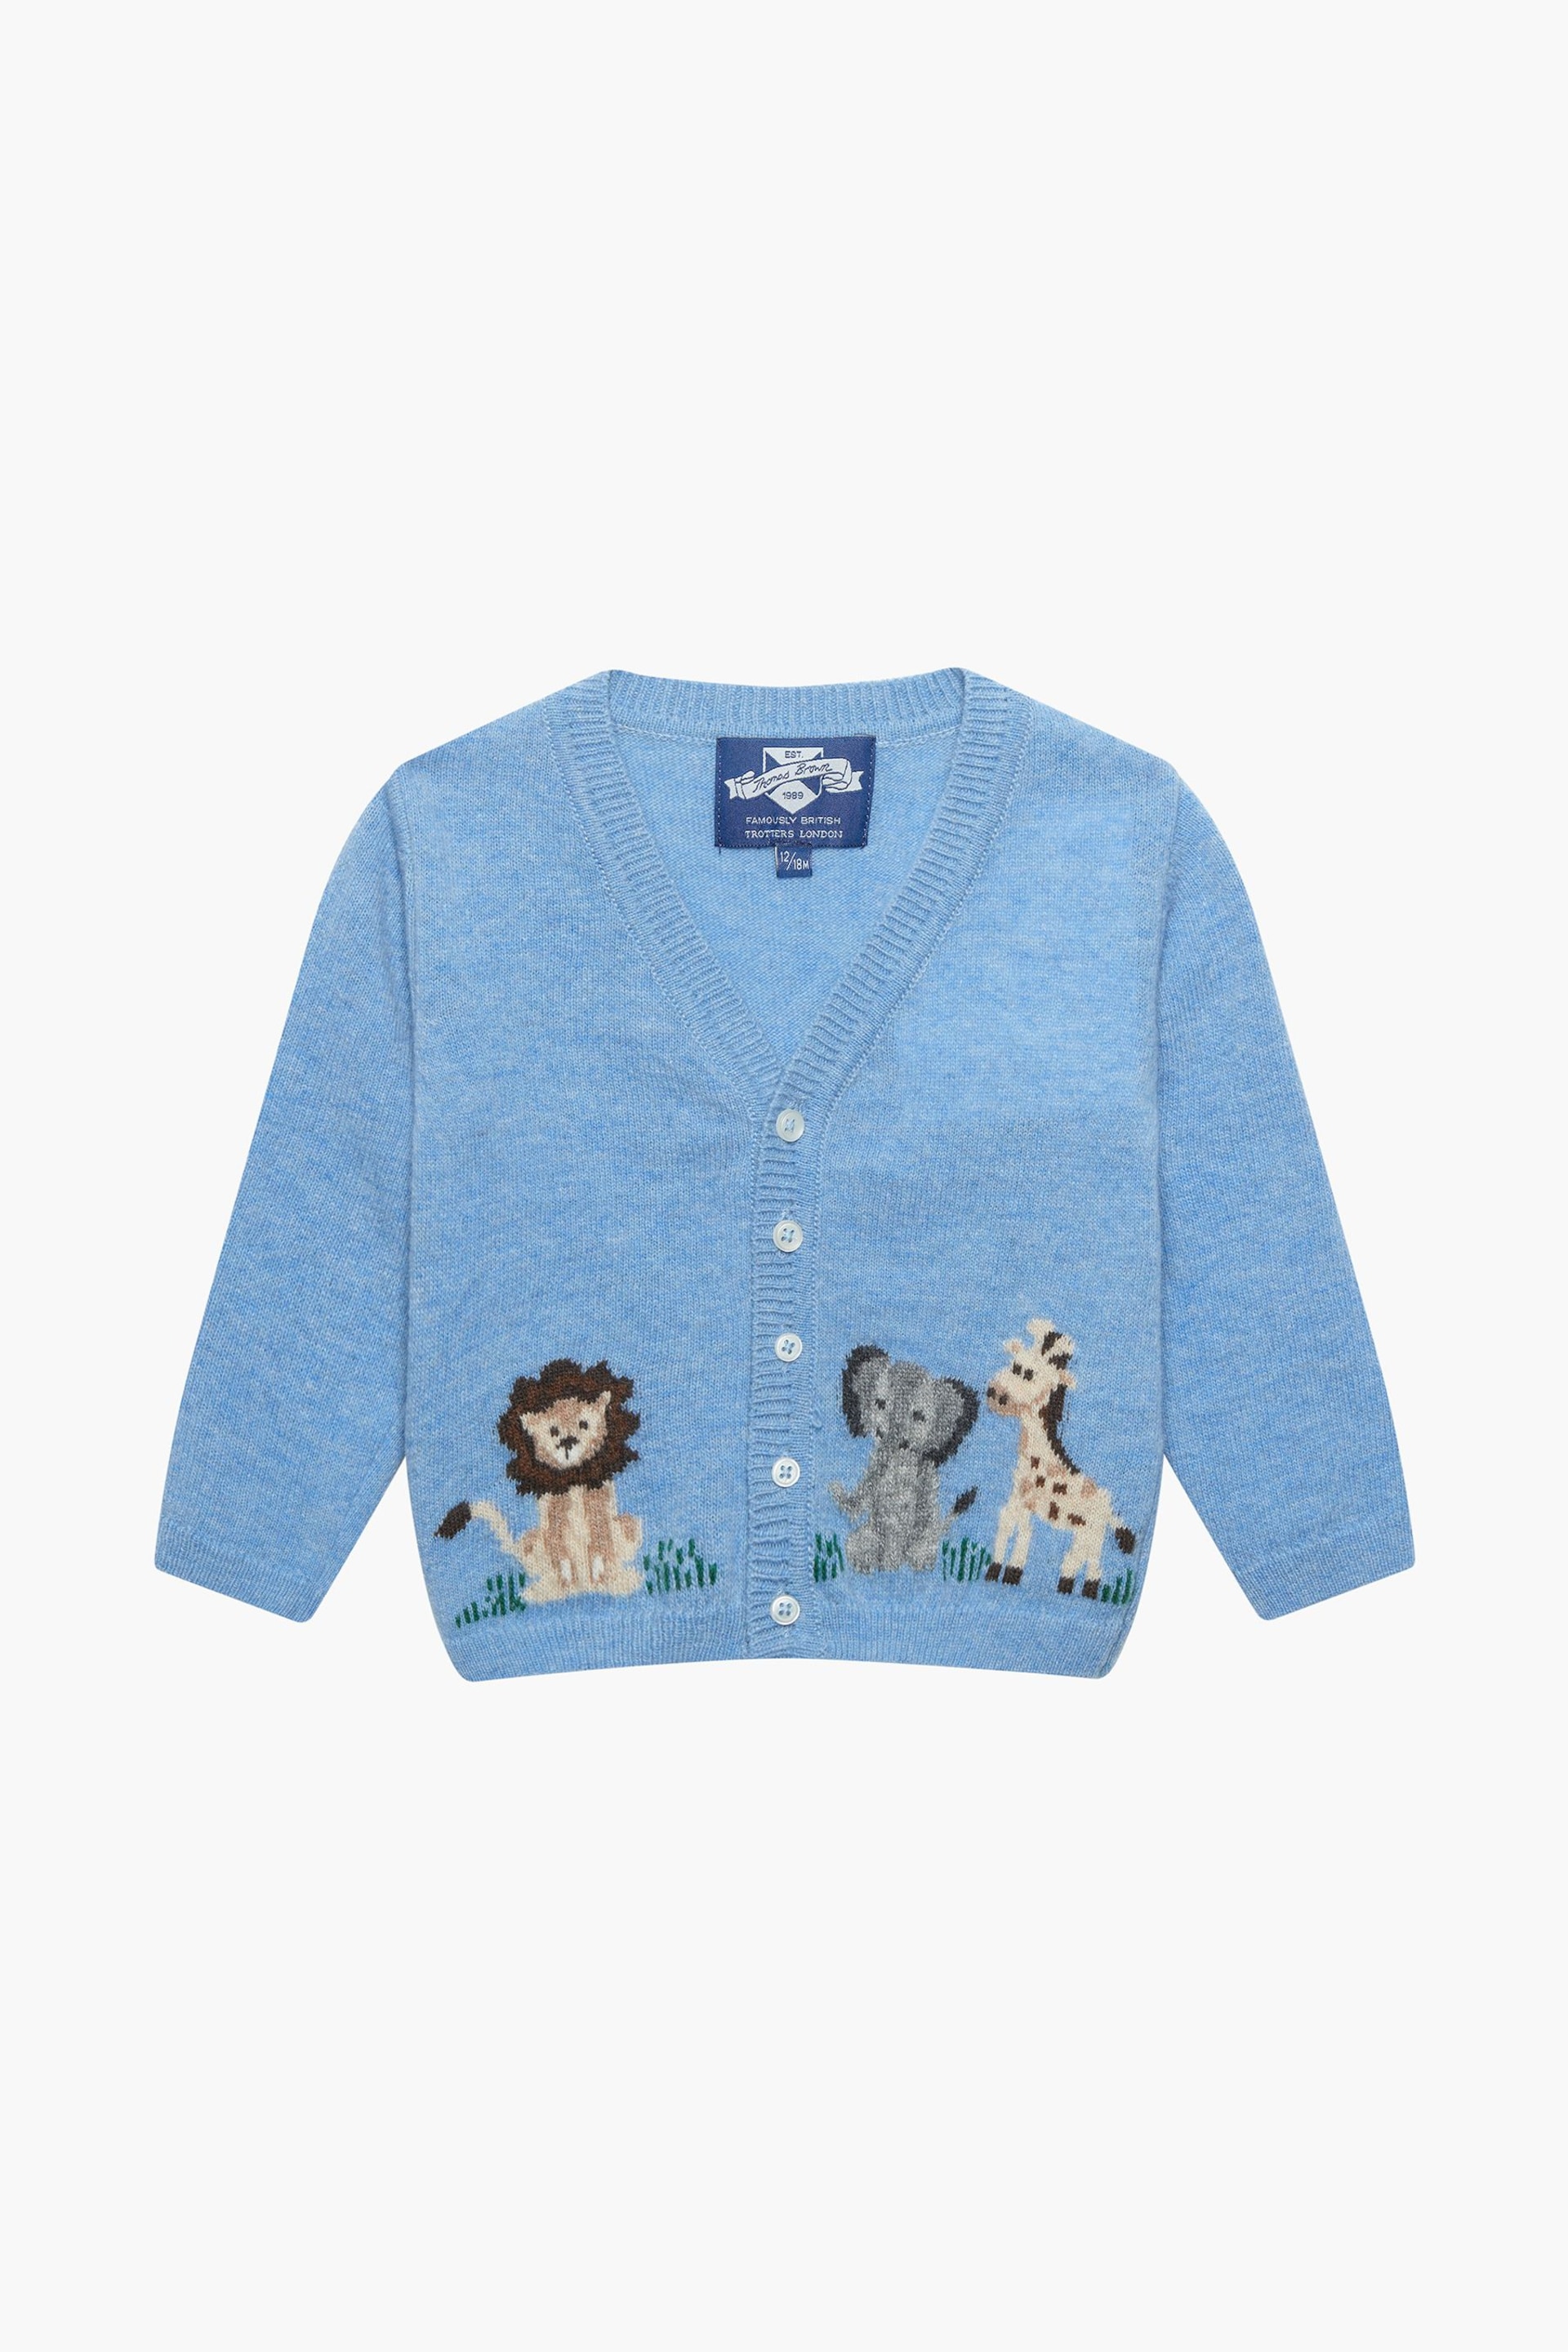 Trotters London Little Blue Marl Augustus And Friends Cardigan - Image 1 of 3